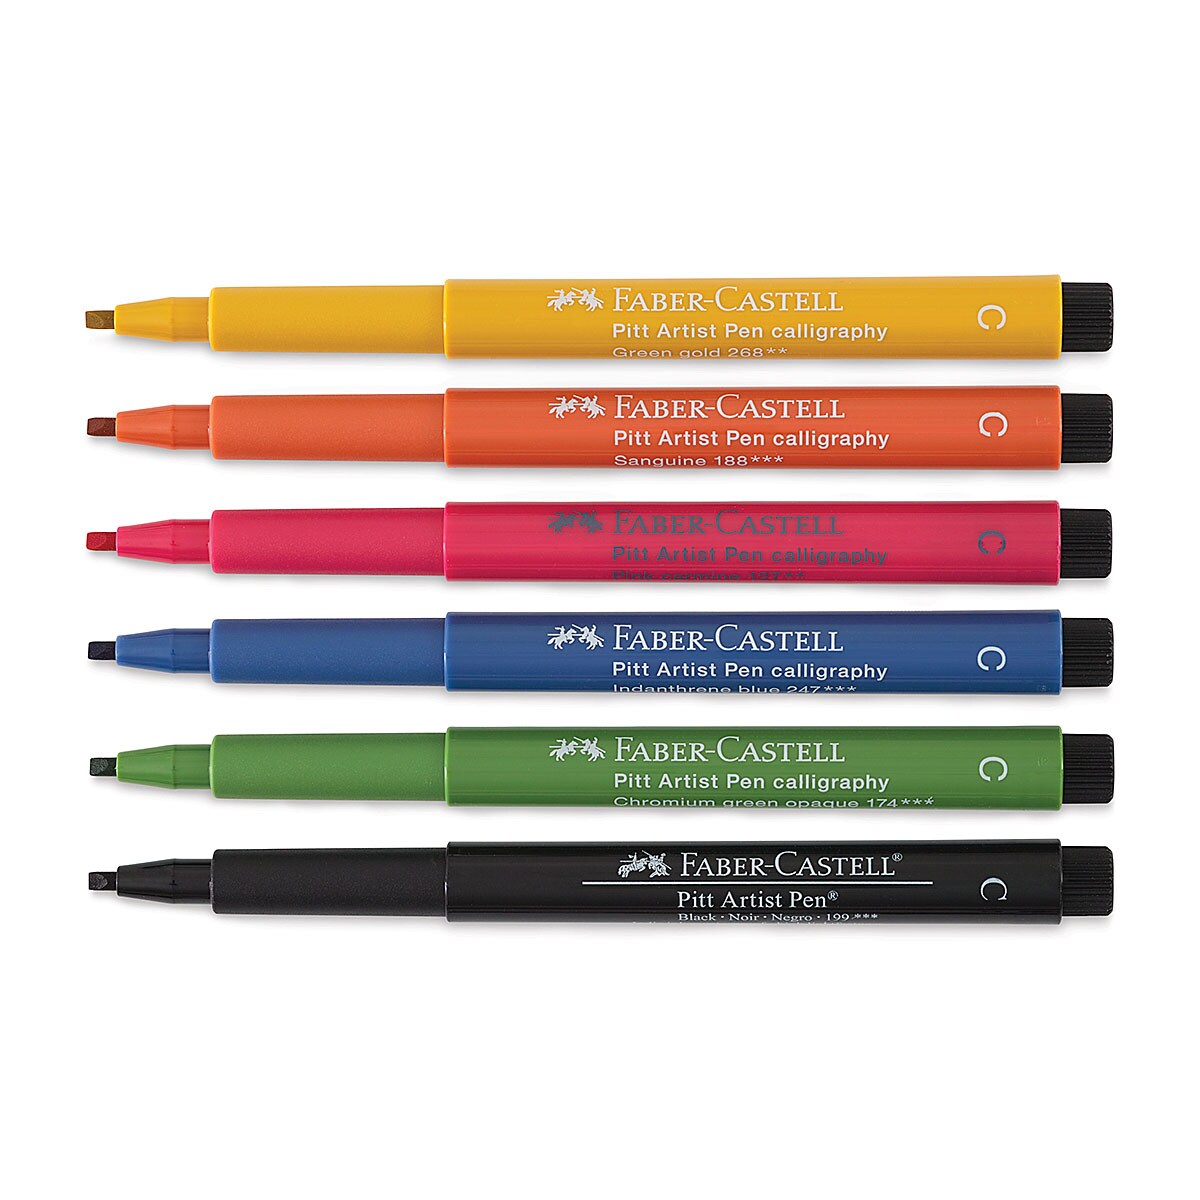 Faber-Castell Calligraphy Pens: Assorted Colors, 2.5mm